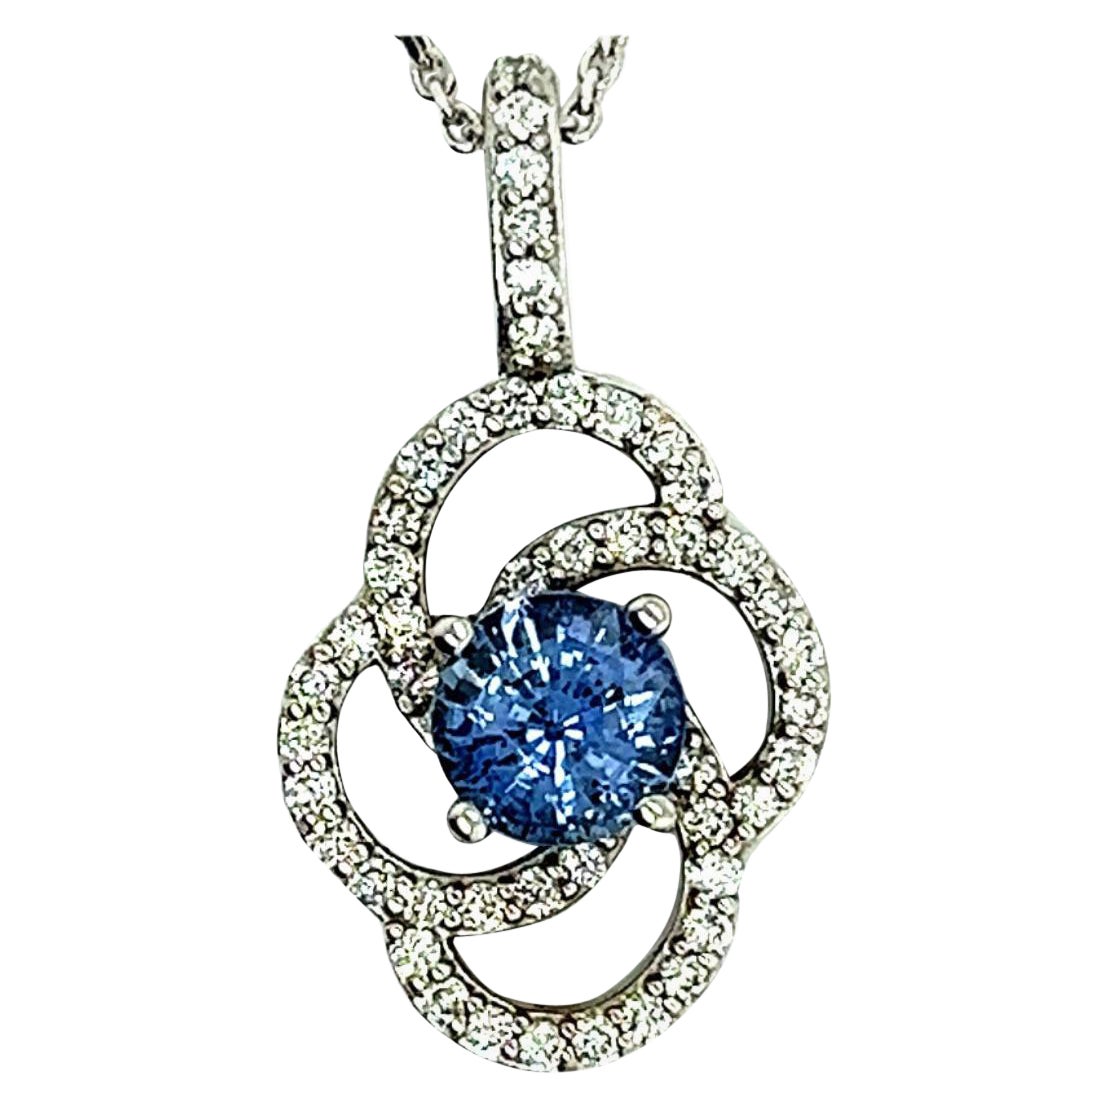 Natural Sapphire Diamond Pendant with Chain 14k W Gold 2.17 TCW Certified For Sale